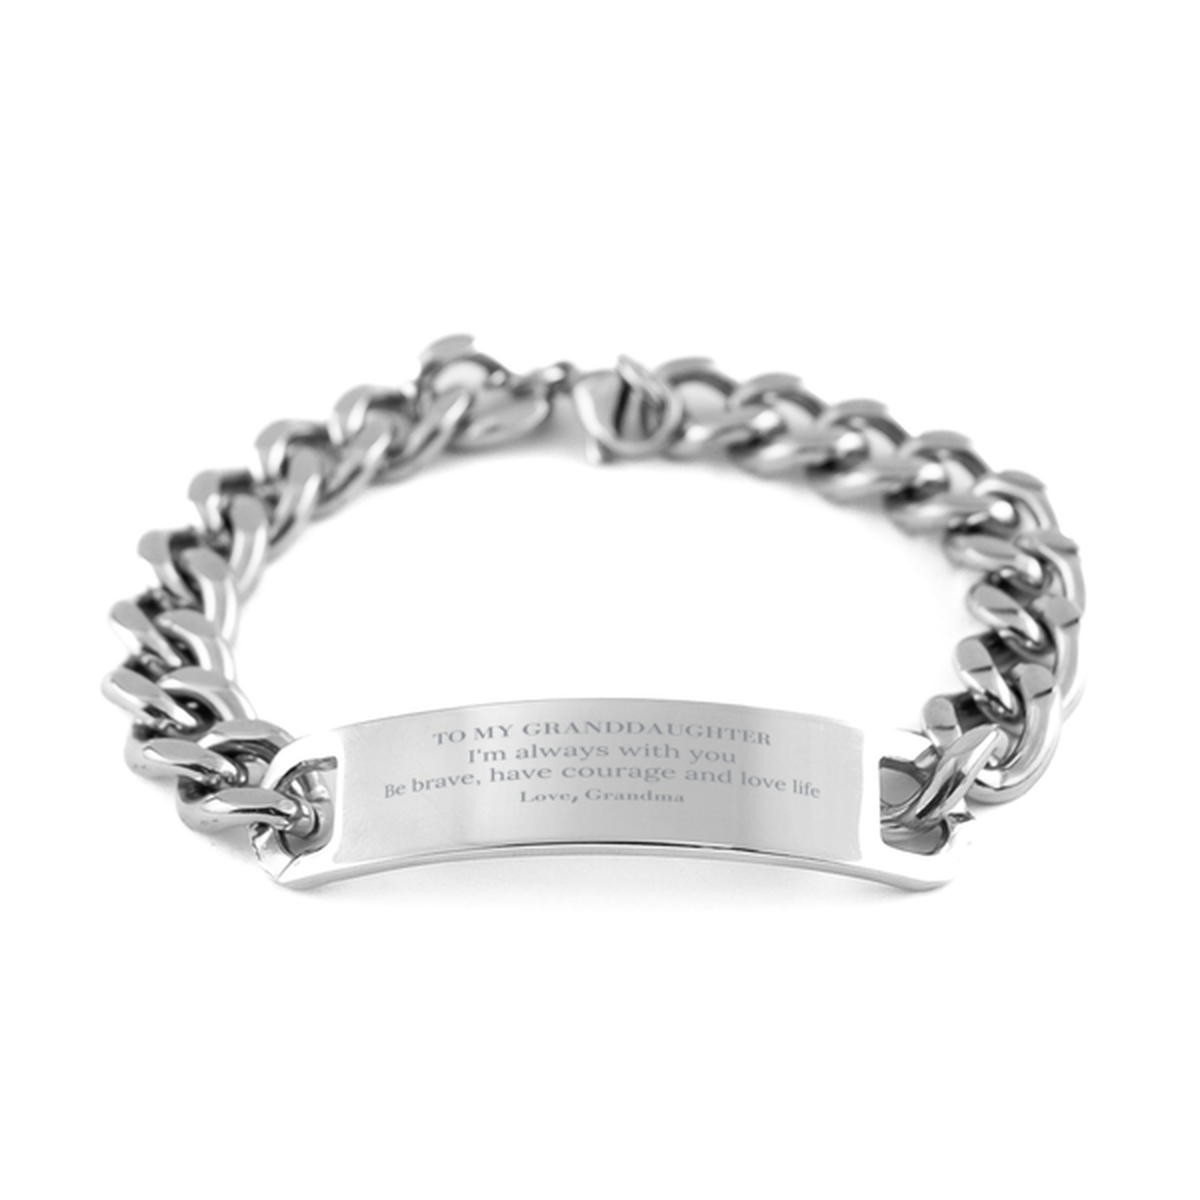 To My Granddaughter Gifts from Grandma, Unique Cuban Chain Stainless Steel Bracelet Inspirational Christmas Birthday Graduation Gifts for Granddaughter I'm always with you. Be brave, have courage and love life. Love, Grandma